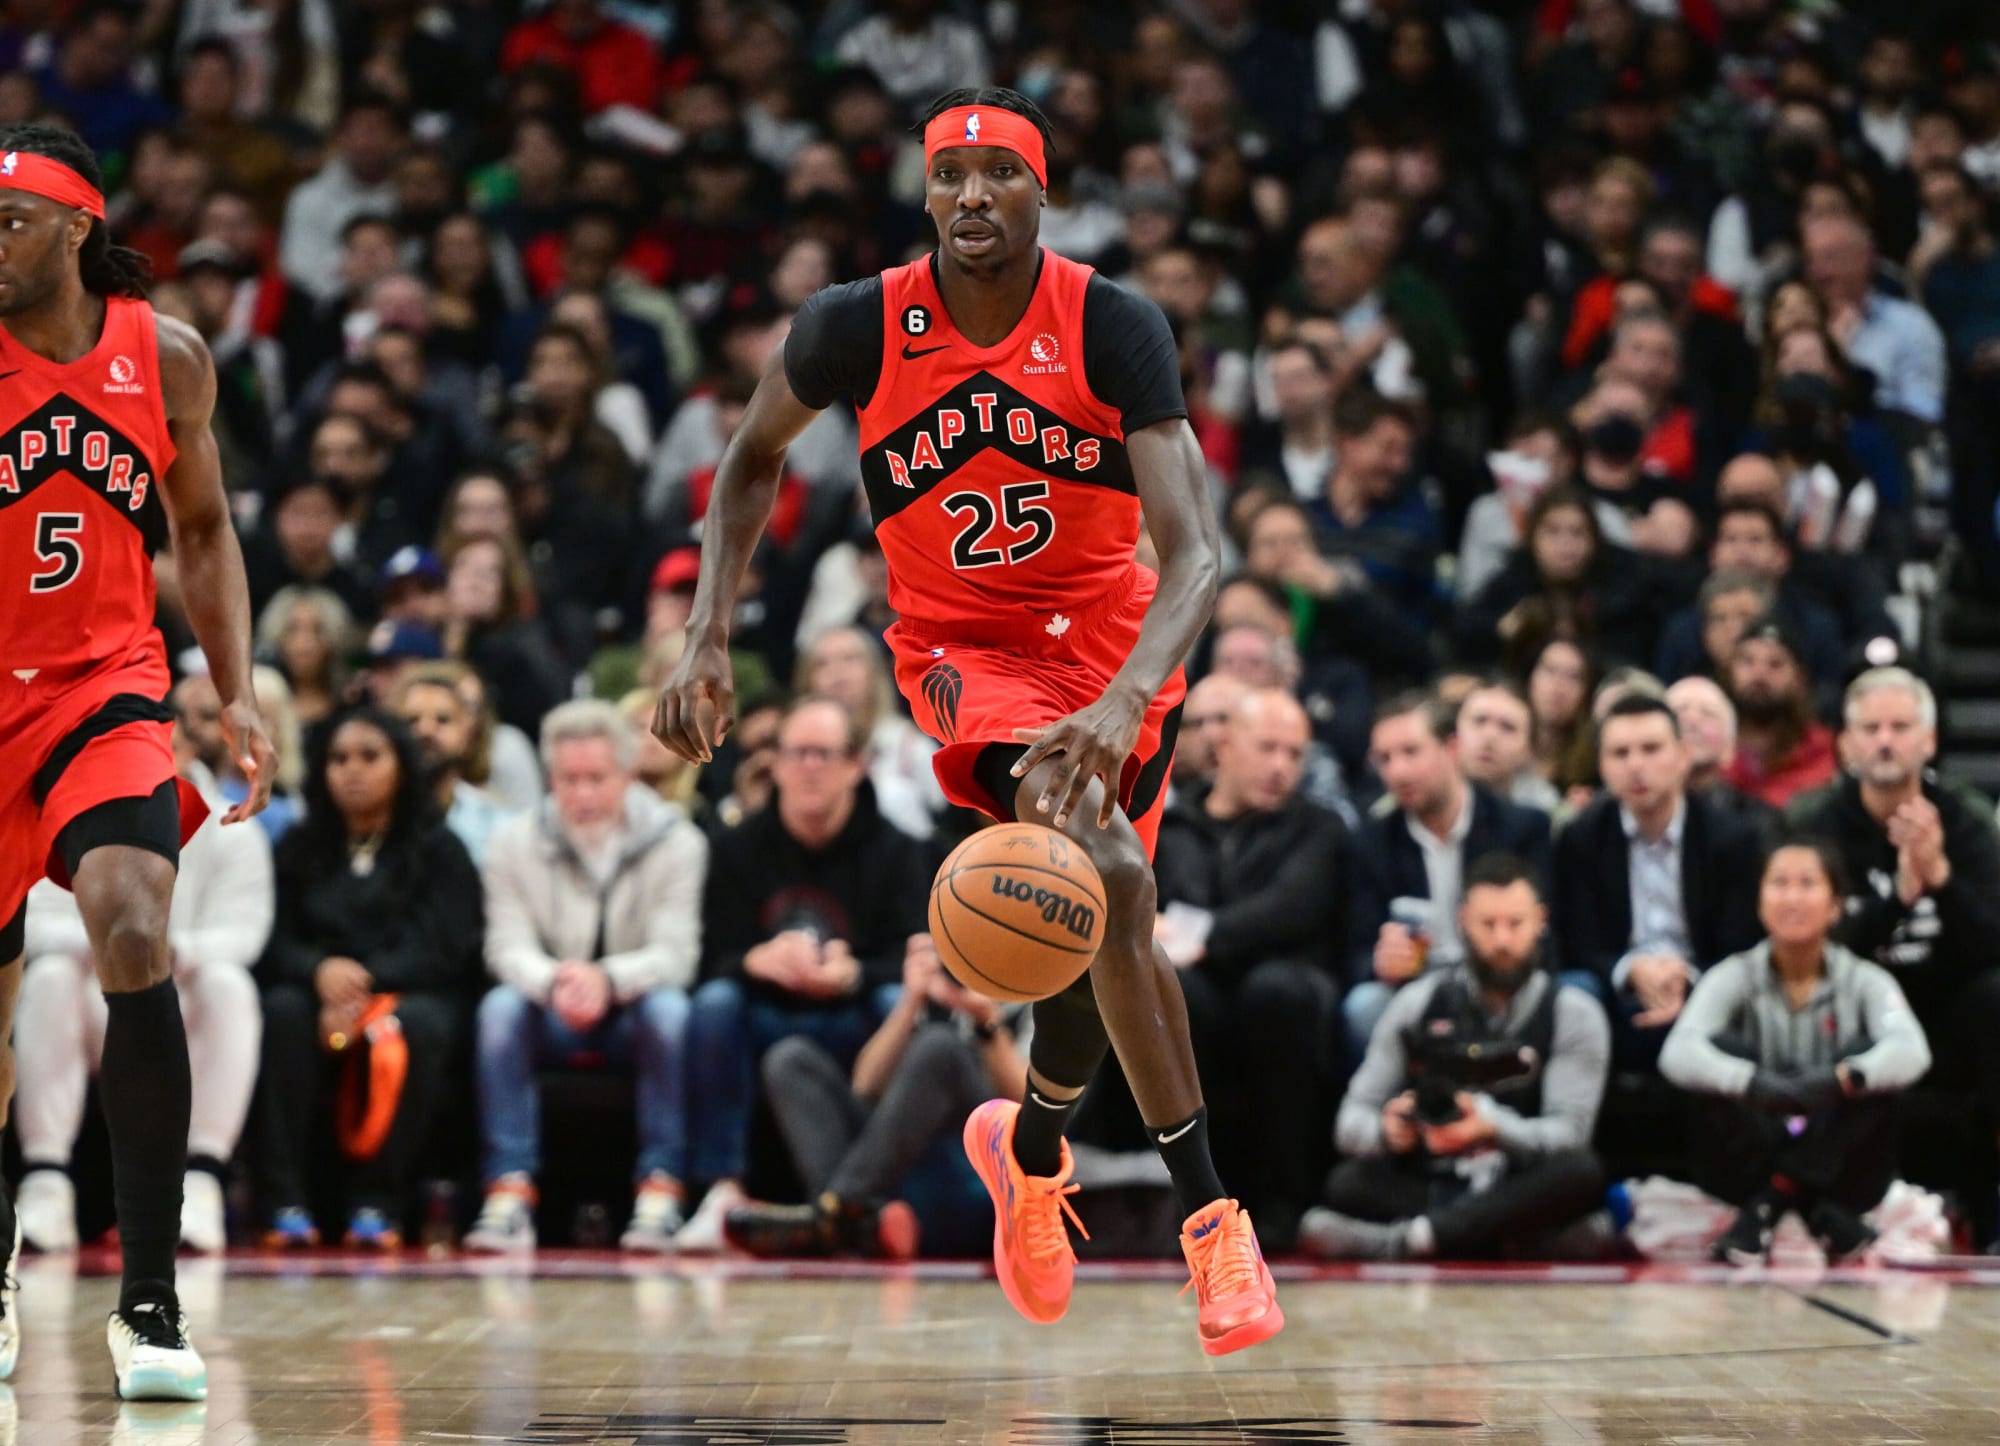 Chris Boucher proved he is Raptors’ Sixth Man in Spurs blowout